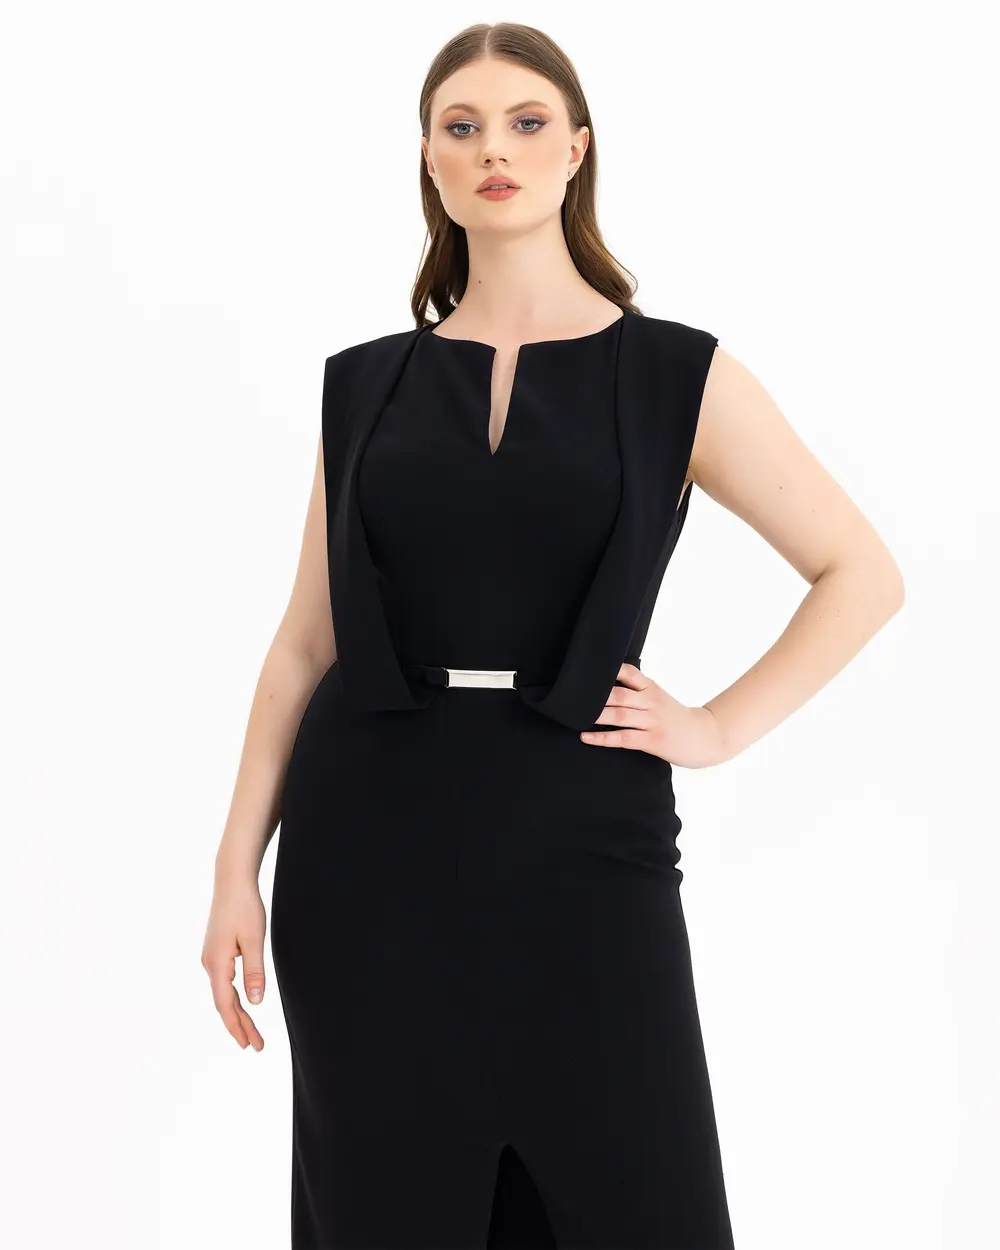 PLUS SIZE BELTED NARROW FORM EVENING DRESS WITH SPLIT DETAIL